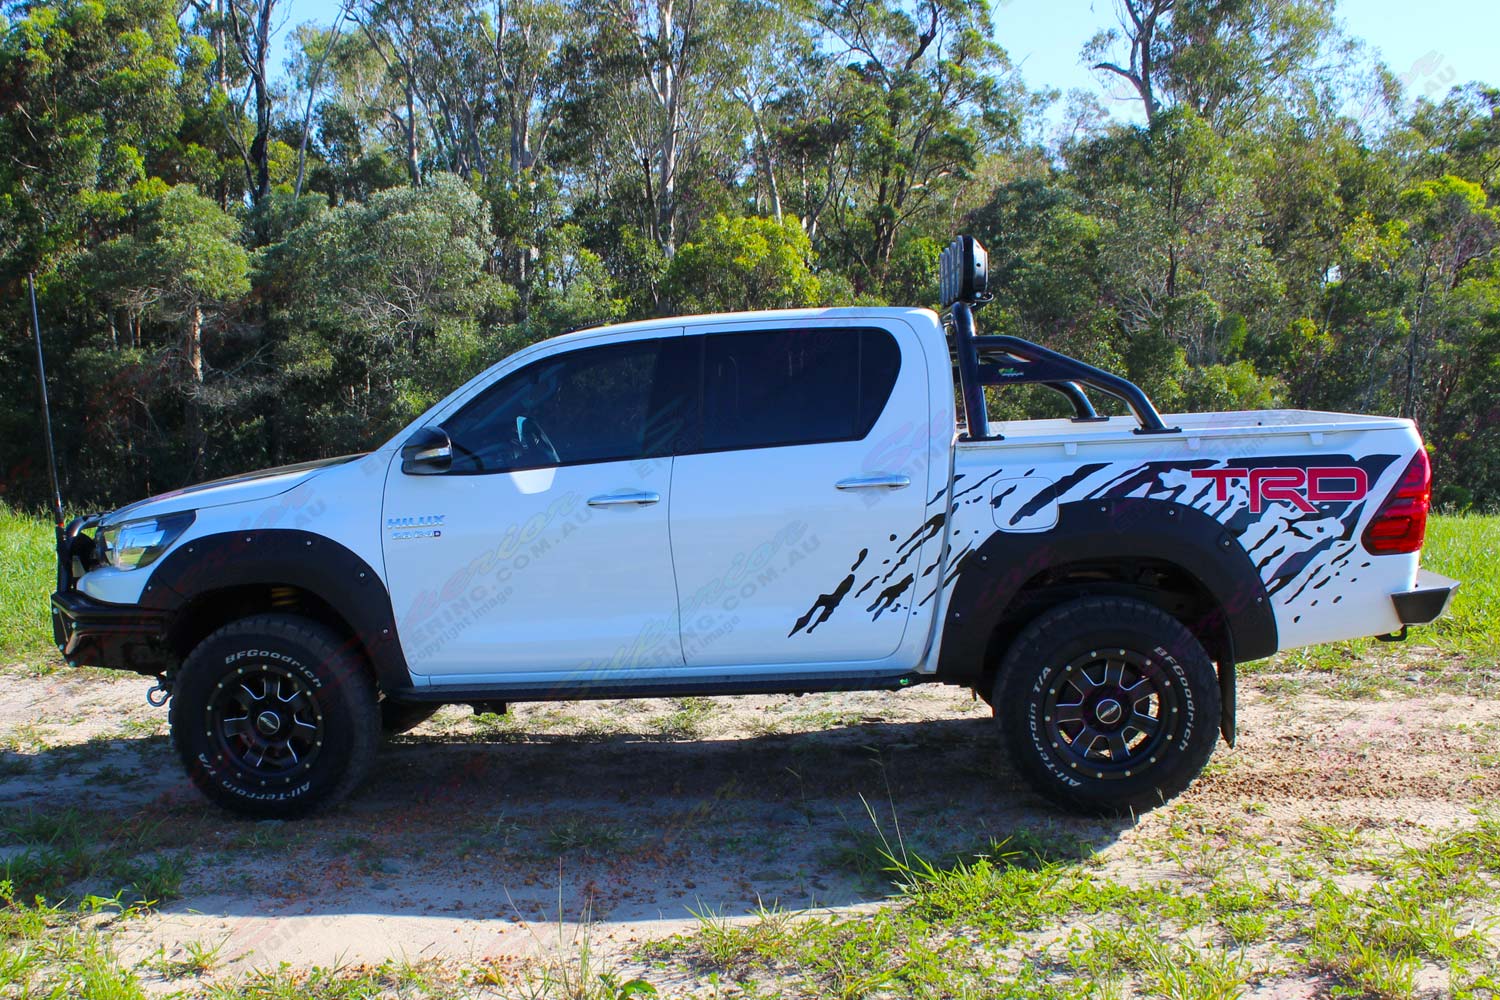 Left side view of a white Toyota Hilux Revo (dual cab) fitted with Australian made Lightforce HTX Hybrid HID LEDs and Ironman 4x4 side steps, sportsbar, flood lights and rear protection bar - by Superior Engineering